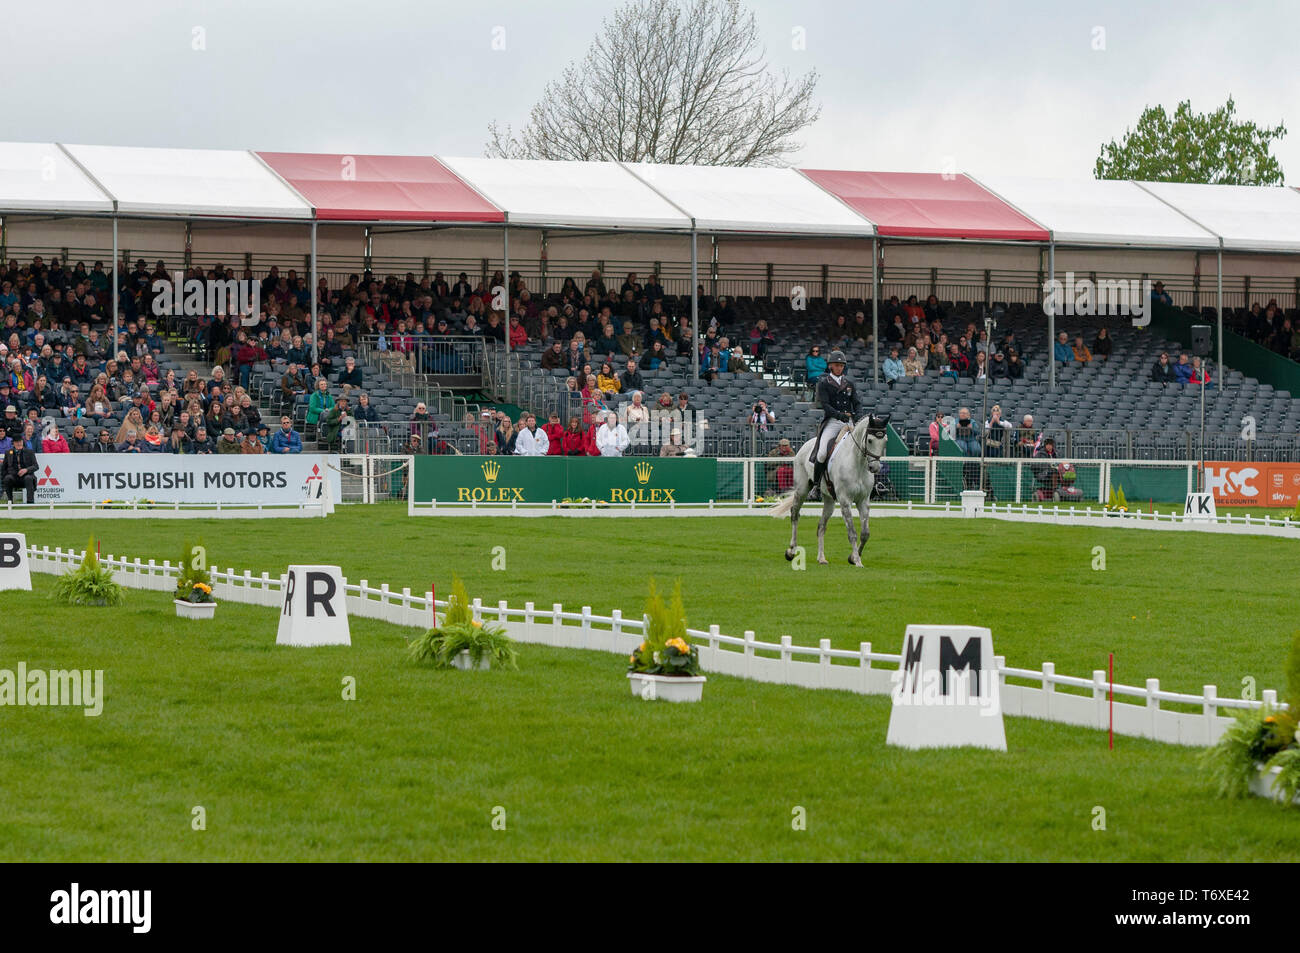 Badminton, Gloucestershire, United Kingdom, 2nd May 2019, Andrew Nicholson riding Swallow Springs during the Dressage Phase of the 2019 Mitsubishi Motors Badminton Horse Trials, Credit:Jonathan Clarke/Alamy Live News Stock Photo